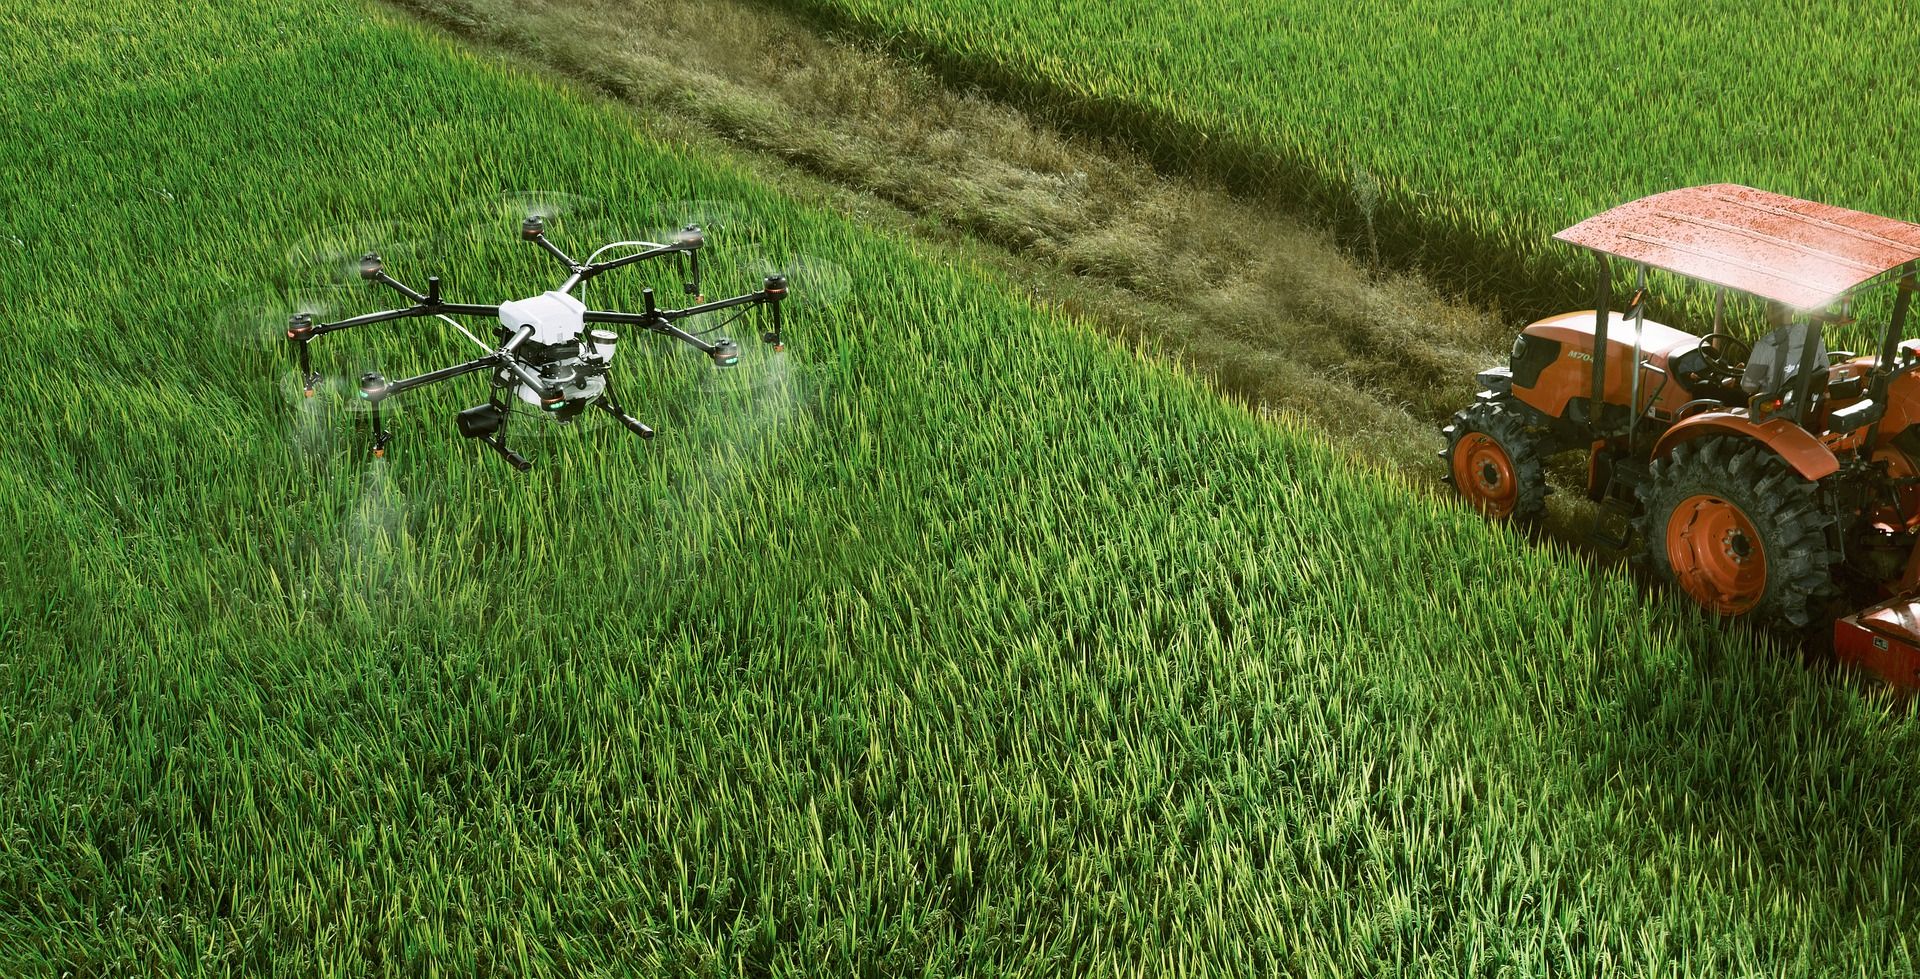 Artificial Intelligence (AI) can help building a strong Agriculture economy